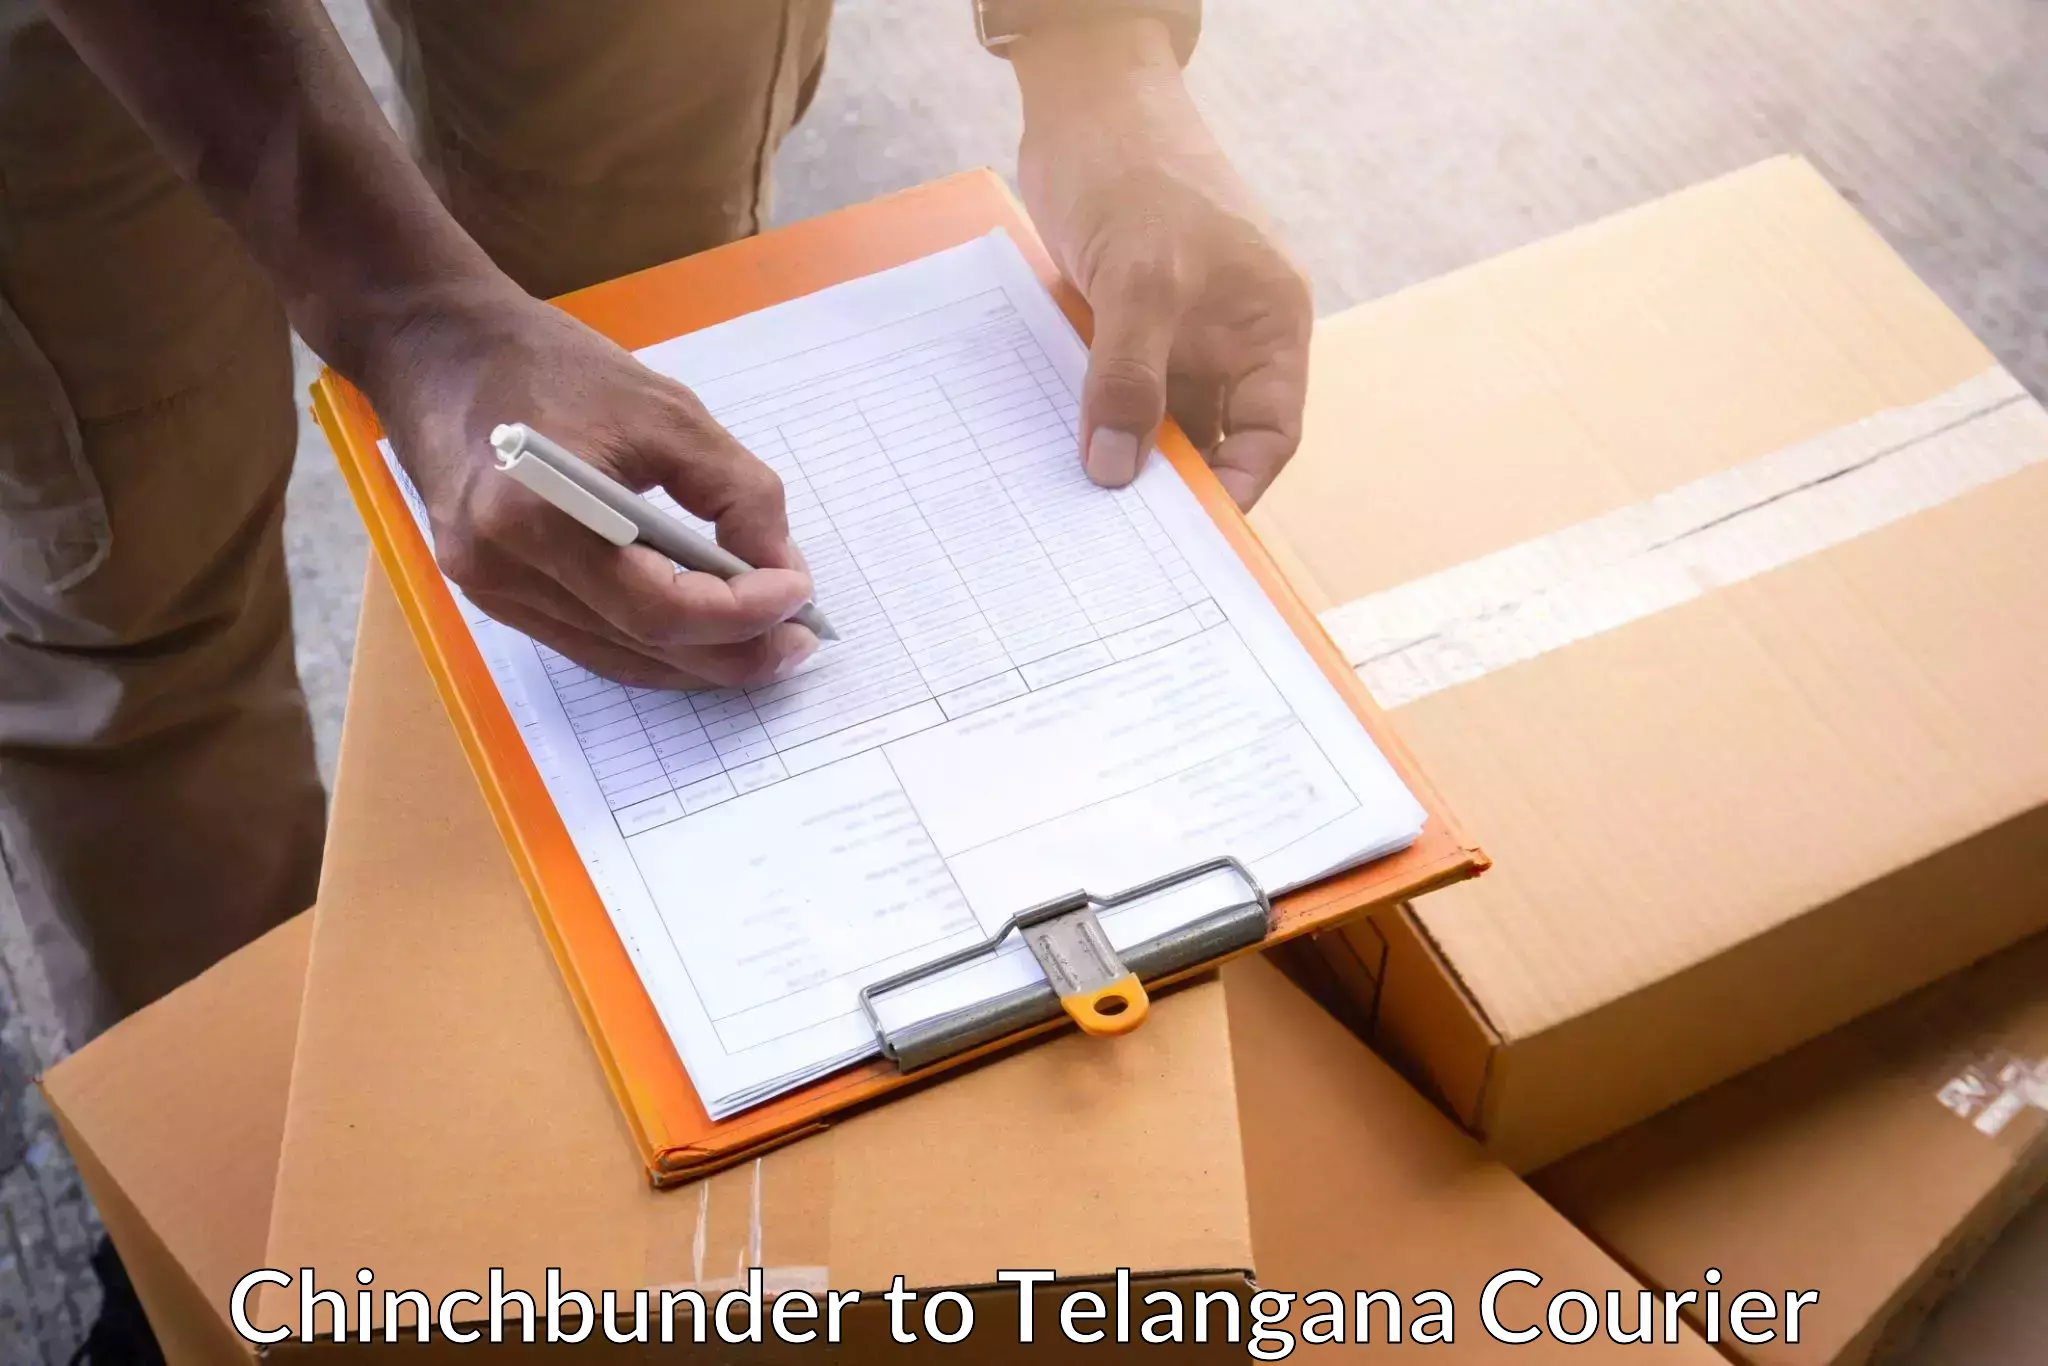 State-of-the-art courier technology Chinchbunder to Alair